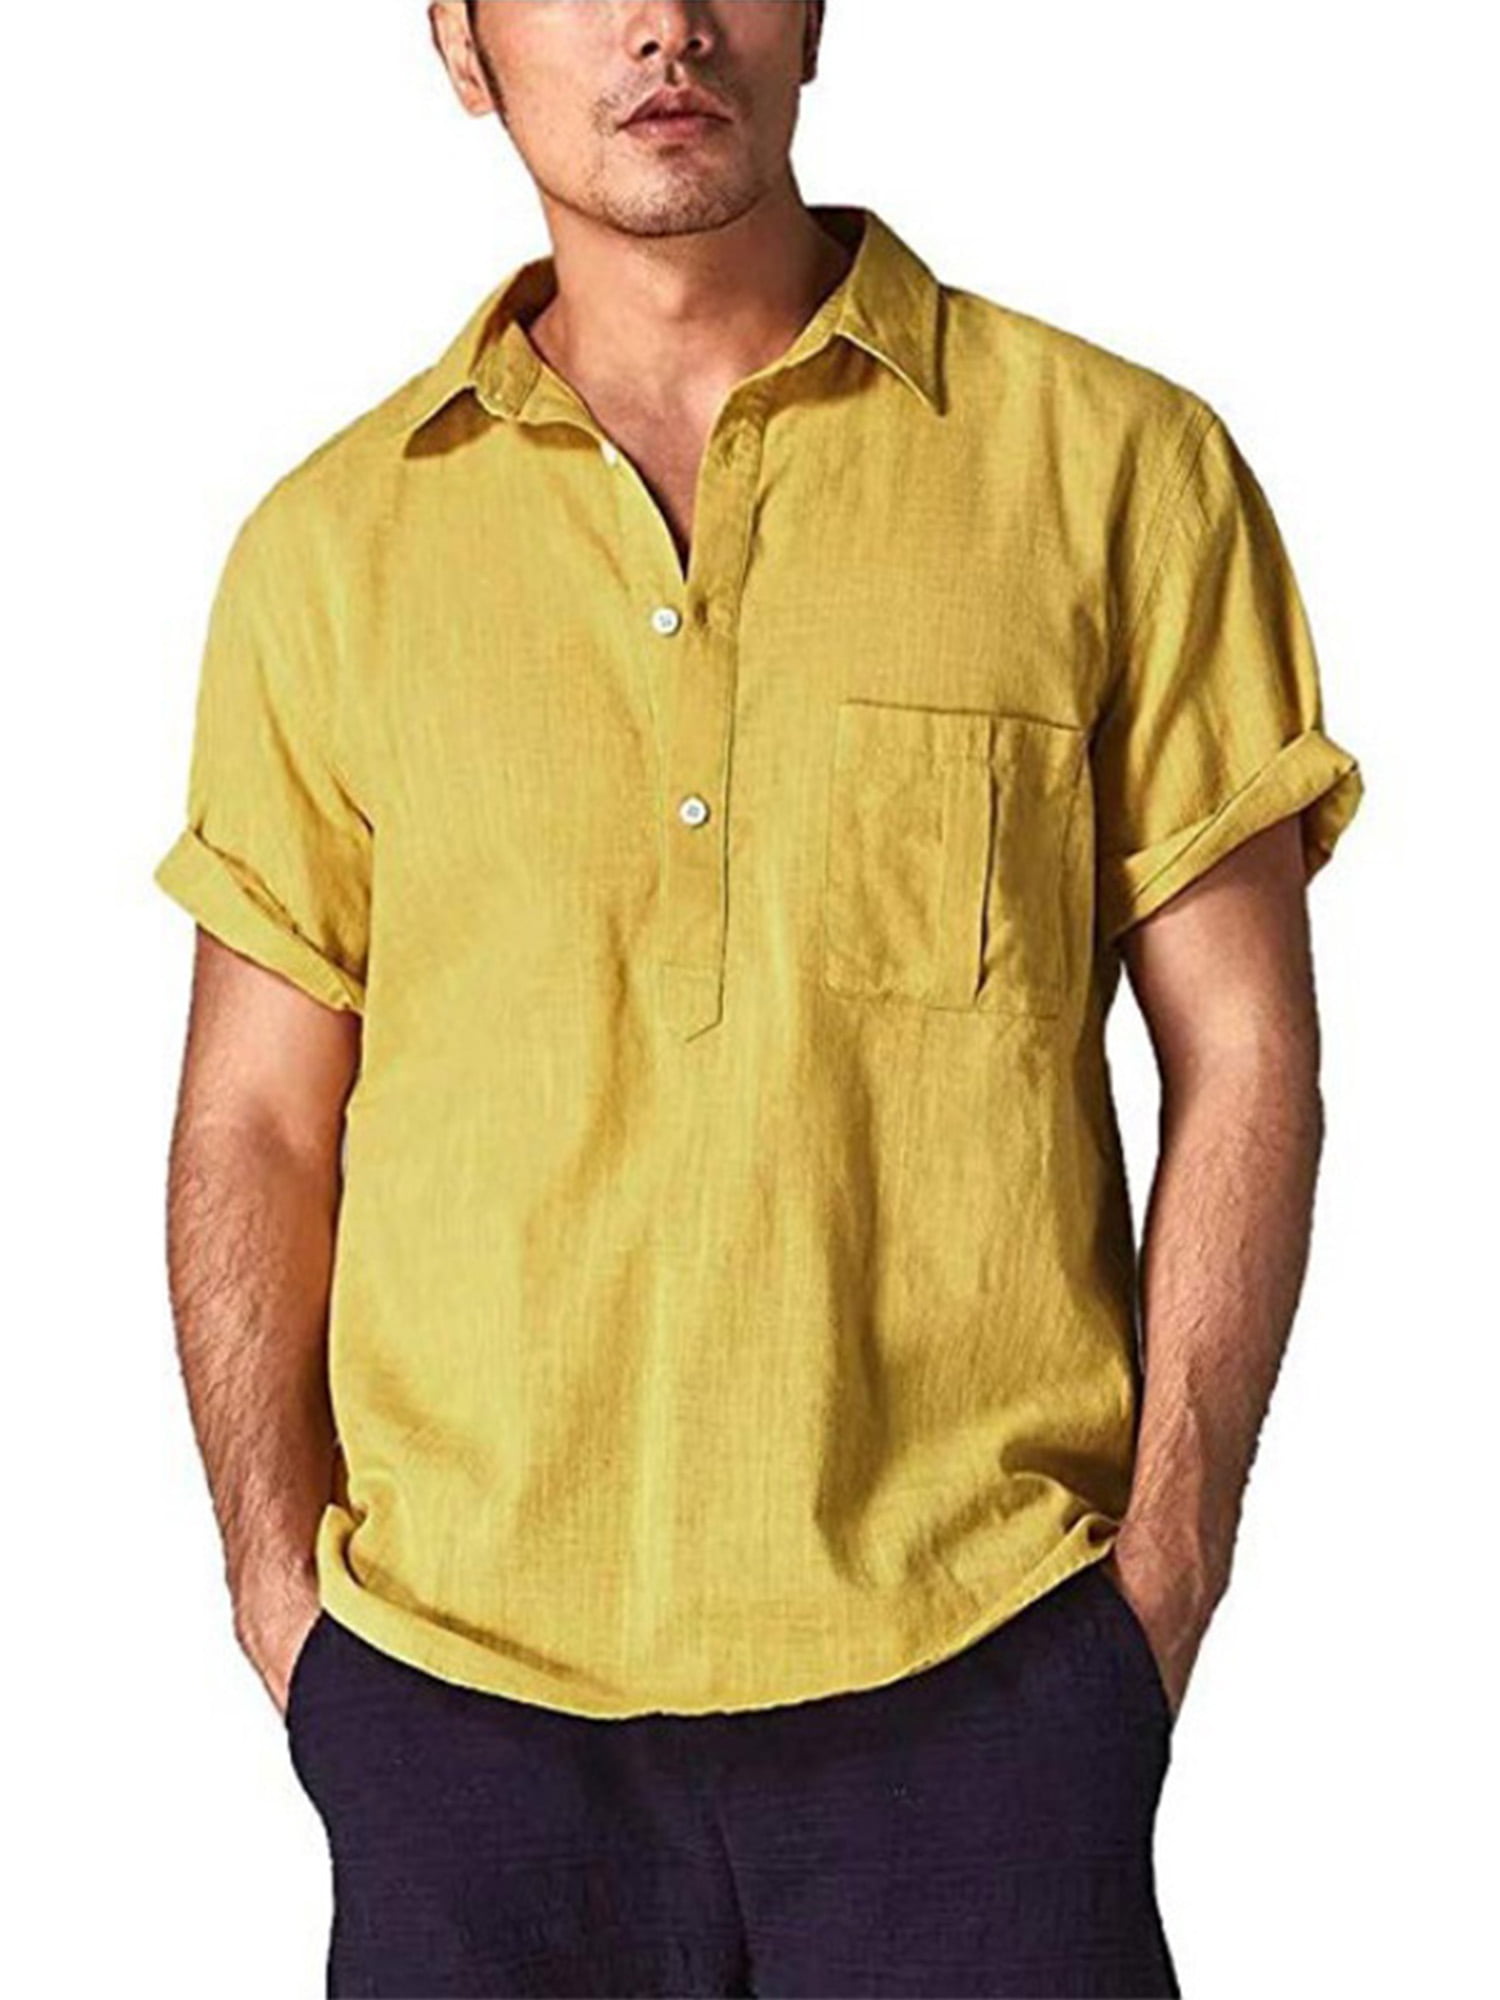 Shirts for Men Summer Baggy Cotton Linen T-Shirts Casual Solid Color Short Sleeve Button T Shirts Retro Top